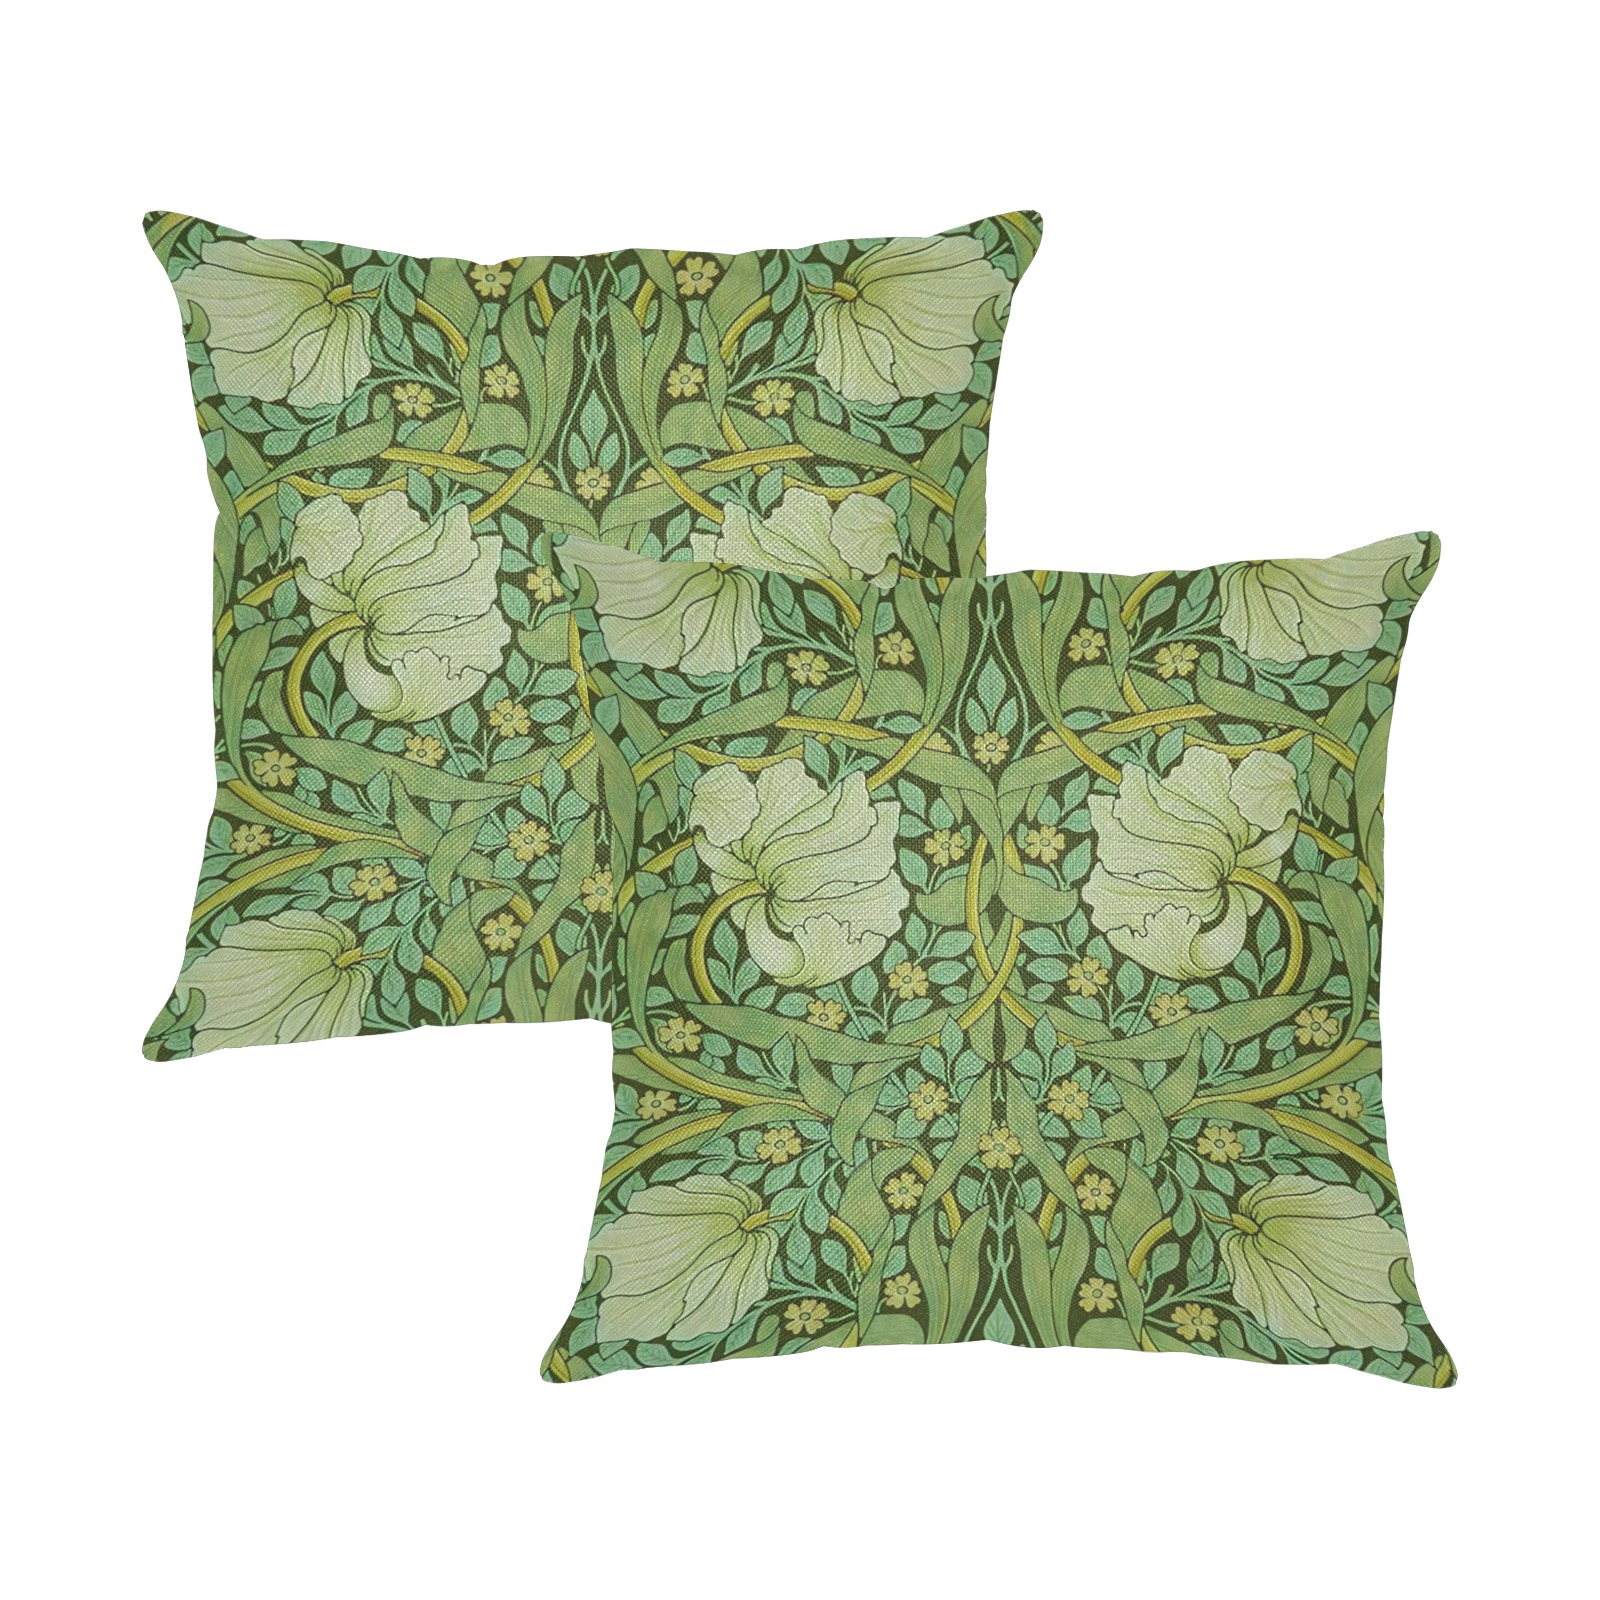 William Morris - Pimpernel Linen Zippered Pillowcase 18"x18"(Two Sides&Pack of 2)